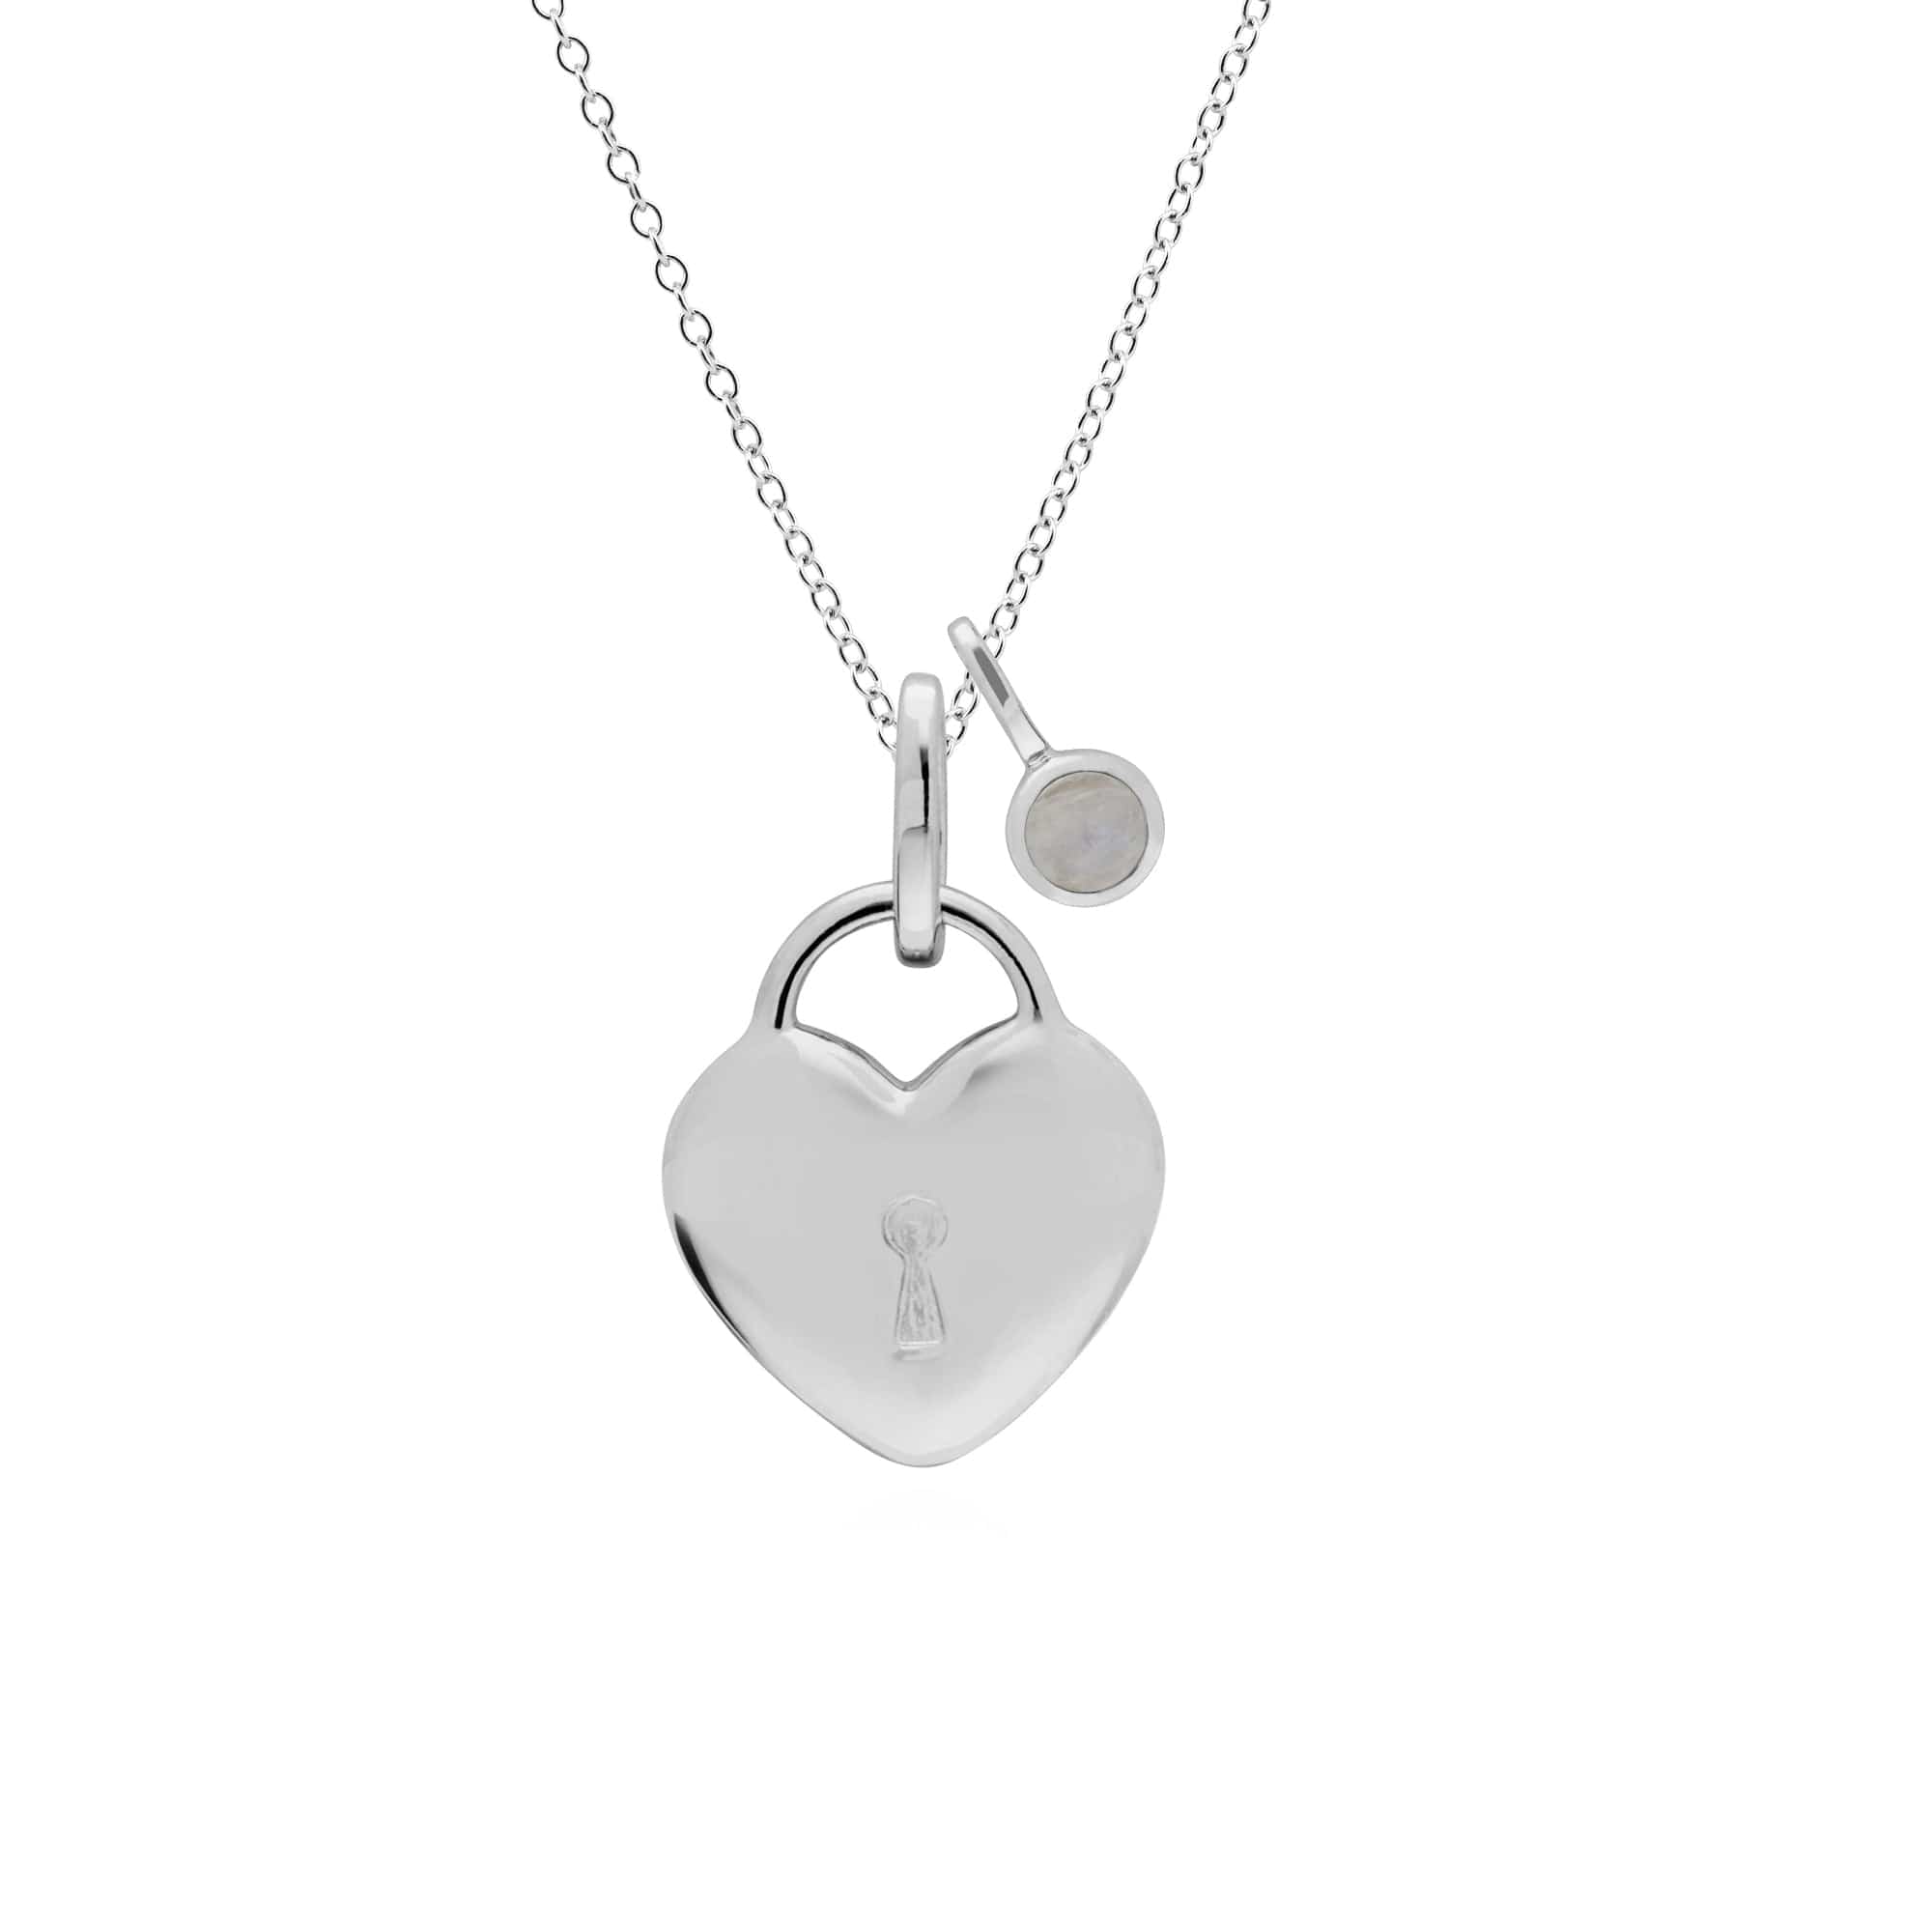 270P028401925-270P027001925 Classic Heart Lock Pendant & Rainbow Moonstone Charm in 925 Sterling Silver 1